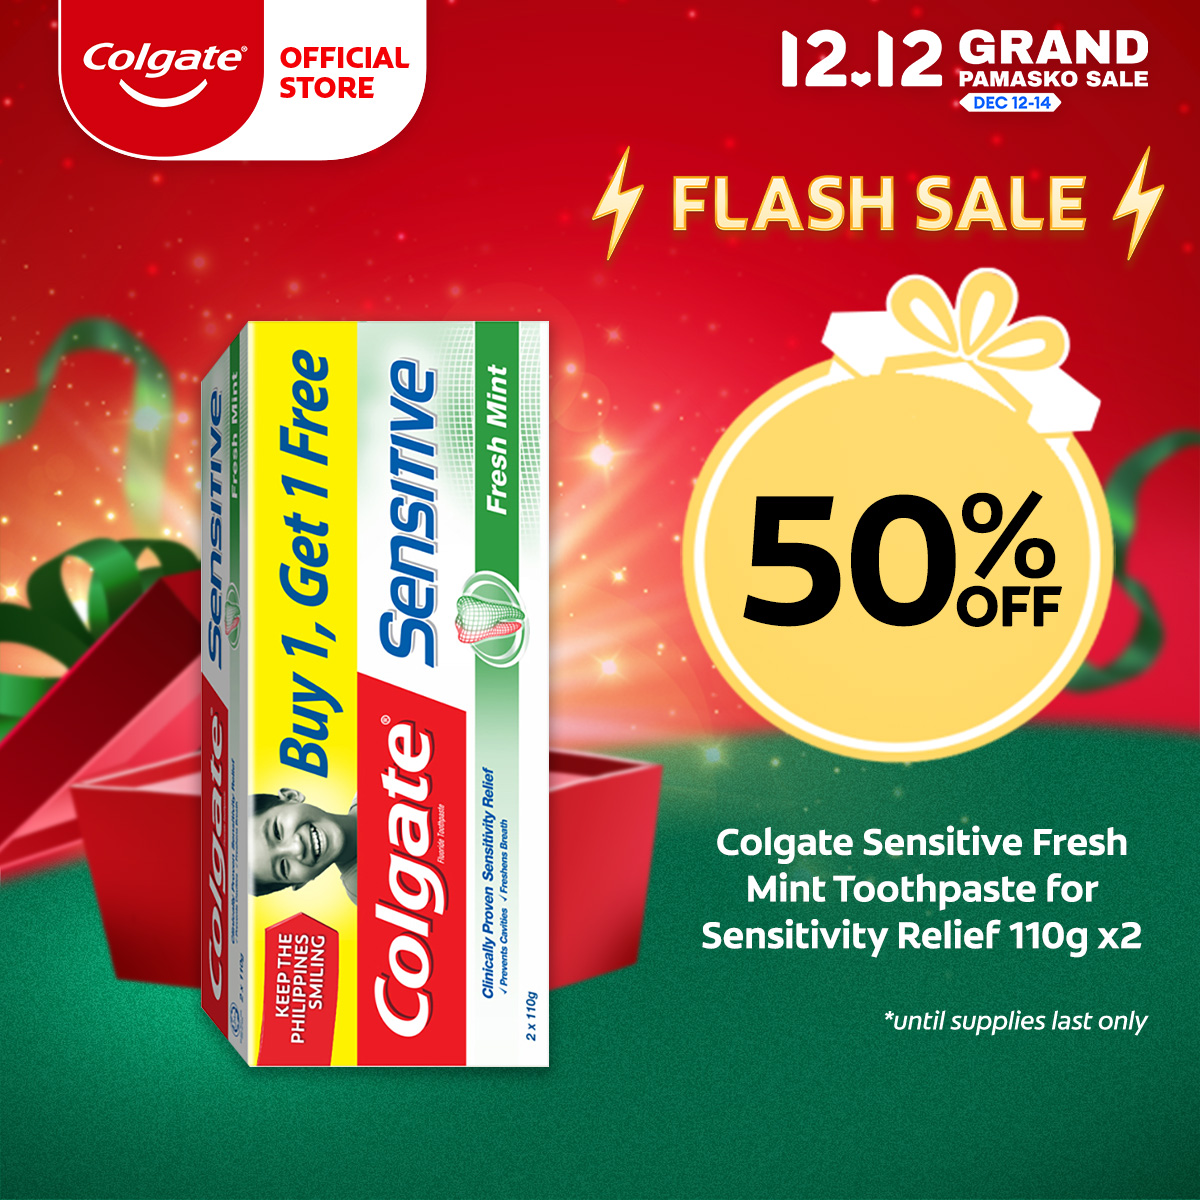 Lazada Philippines - Colgate Sensitive Fresh Mint Toothpaste for Sensitivity Relief 110g – Buy 1, Get 1 Free